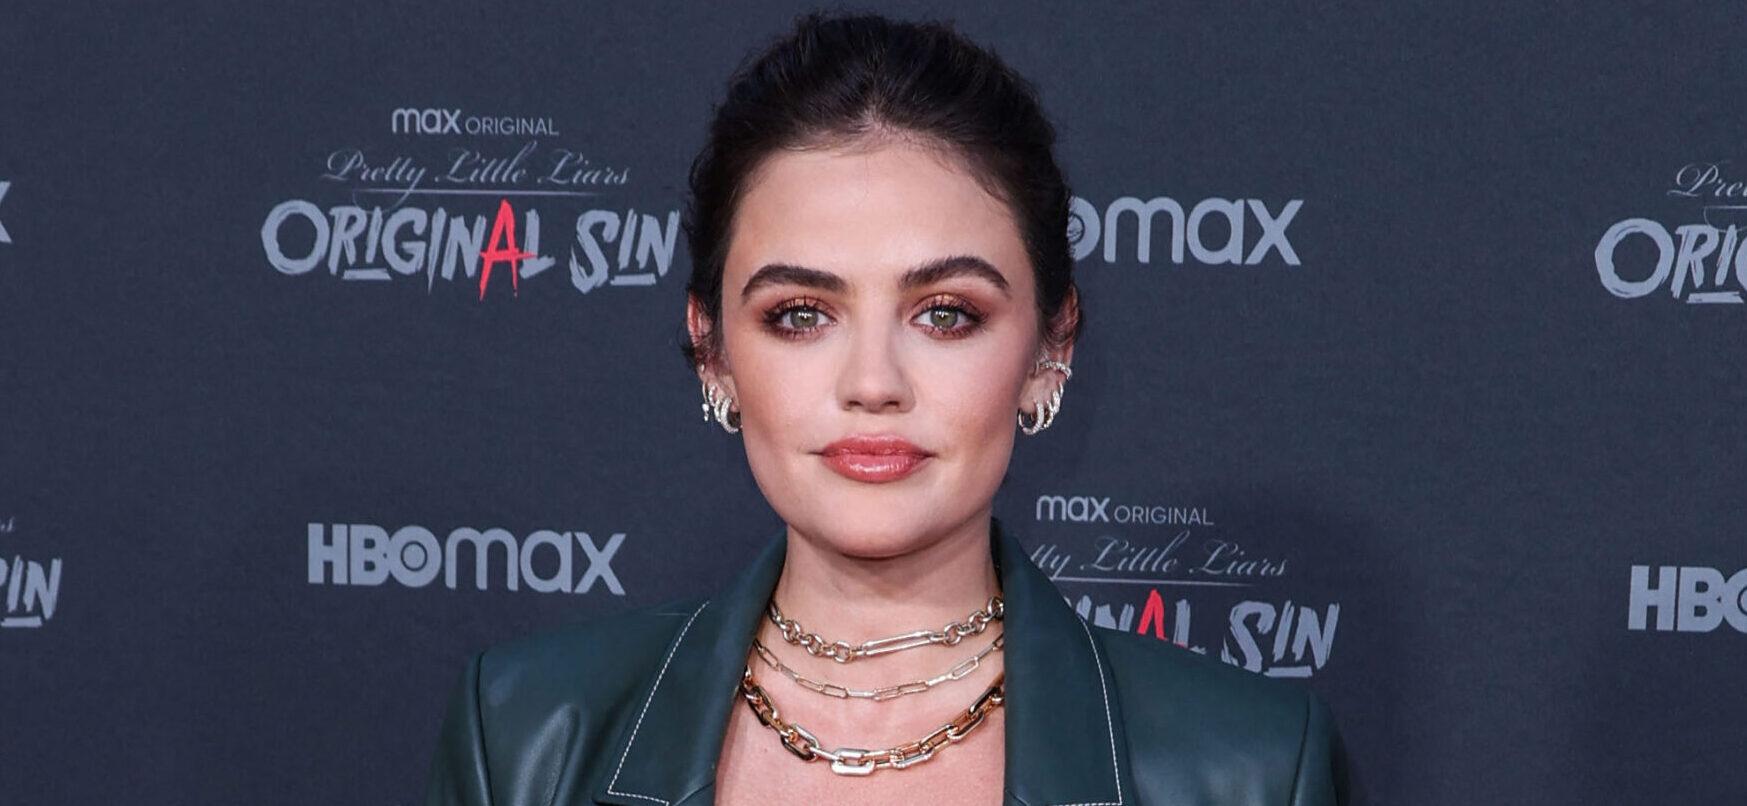 BURBANK, LOS ANGELES, CALIFORNIA, USA - JULY 15: Bloody Red Carpet And Exclusive Screening Of HBO Max's 'Pretty Little Liars: Original Sin' held at the SJR Theater at Warner Bros. Studios on July 15, 2022 in Burbank, Los Angeles, California, United States. 16 Jul 2022 Pictured: Lucy Hale. Photo credit: Xavier Collin/Image Press Agency/MEGA TheMegaAgency.com +1 888 505 6342 (Mega Agency TagID: MEGA878557_081.jpg) [Photo via Mega Agency]